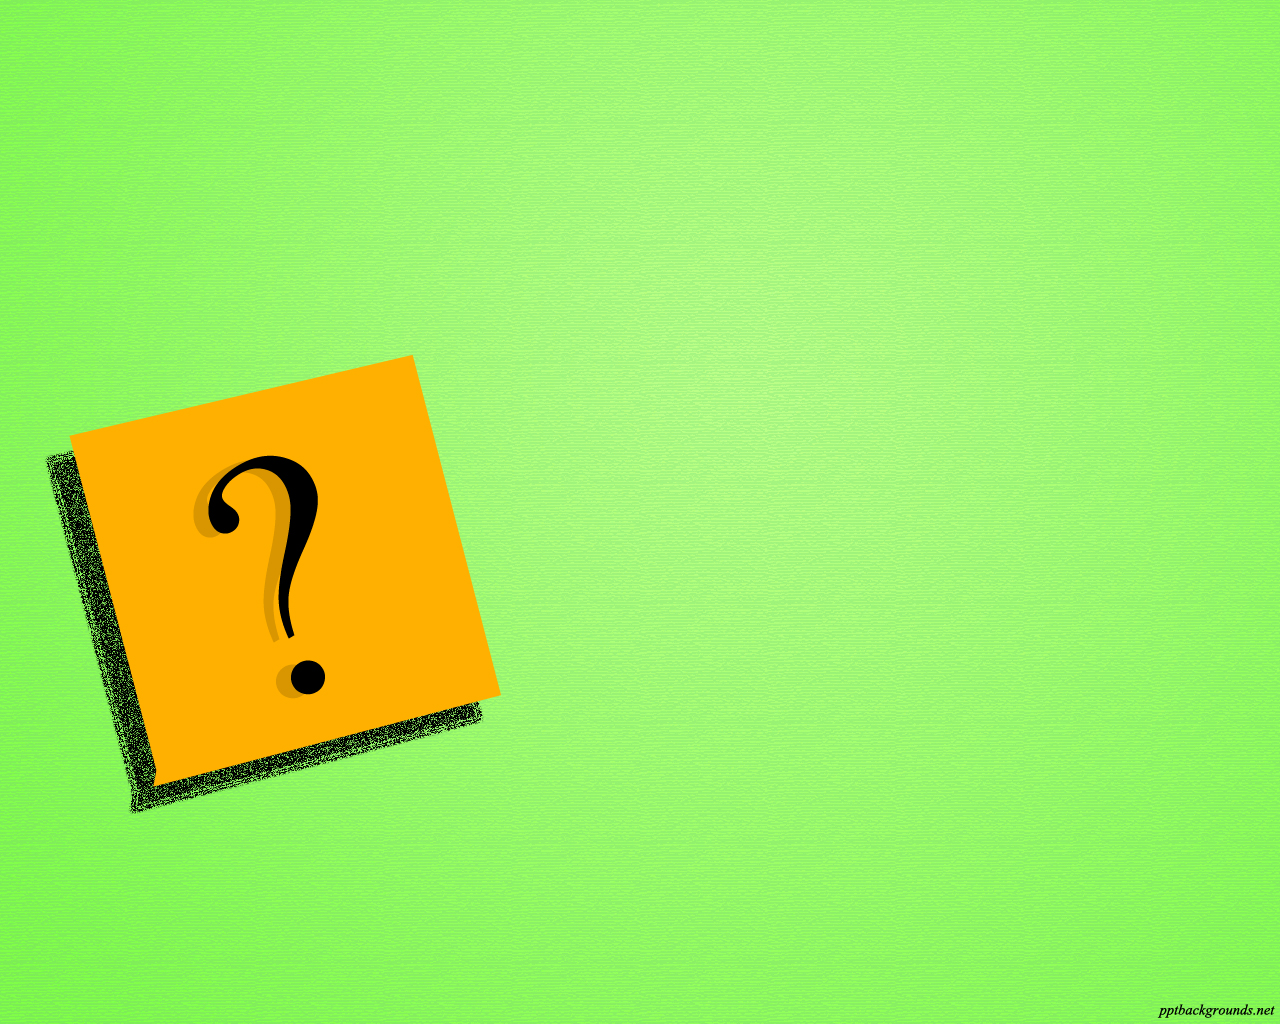 Free Orange Question Mark On Green Backgrounds For PowerPoint